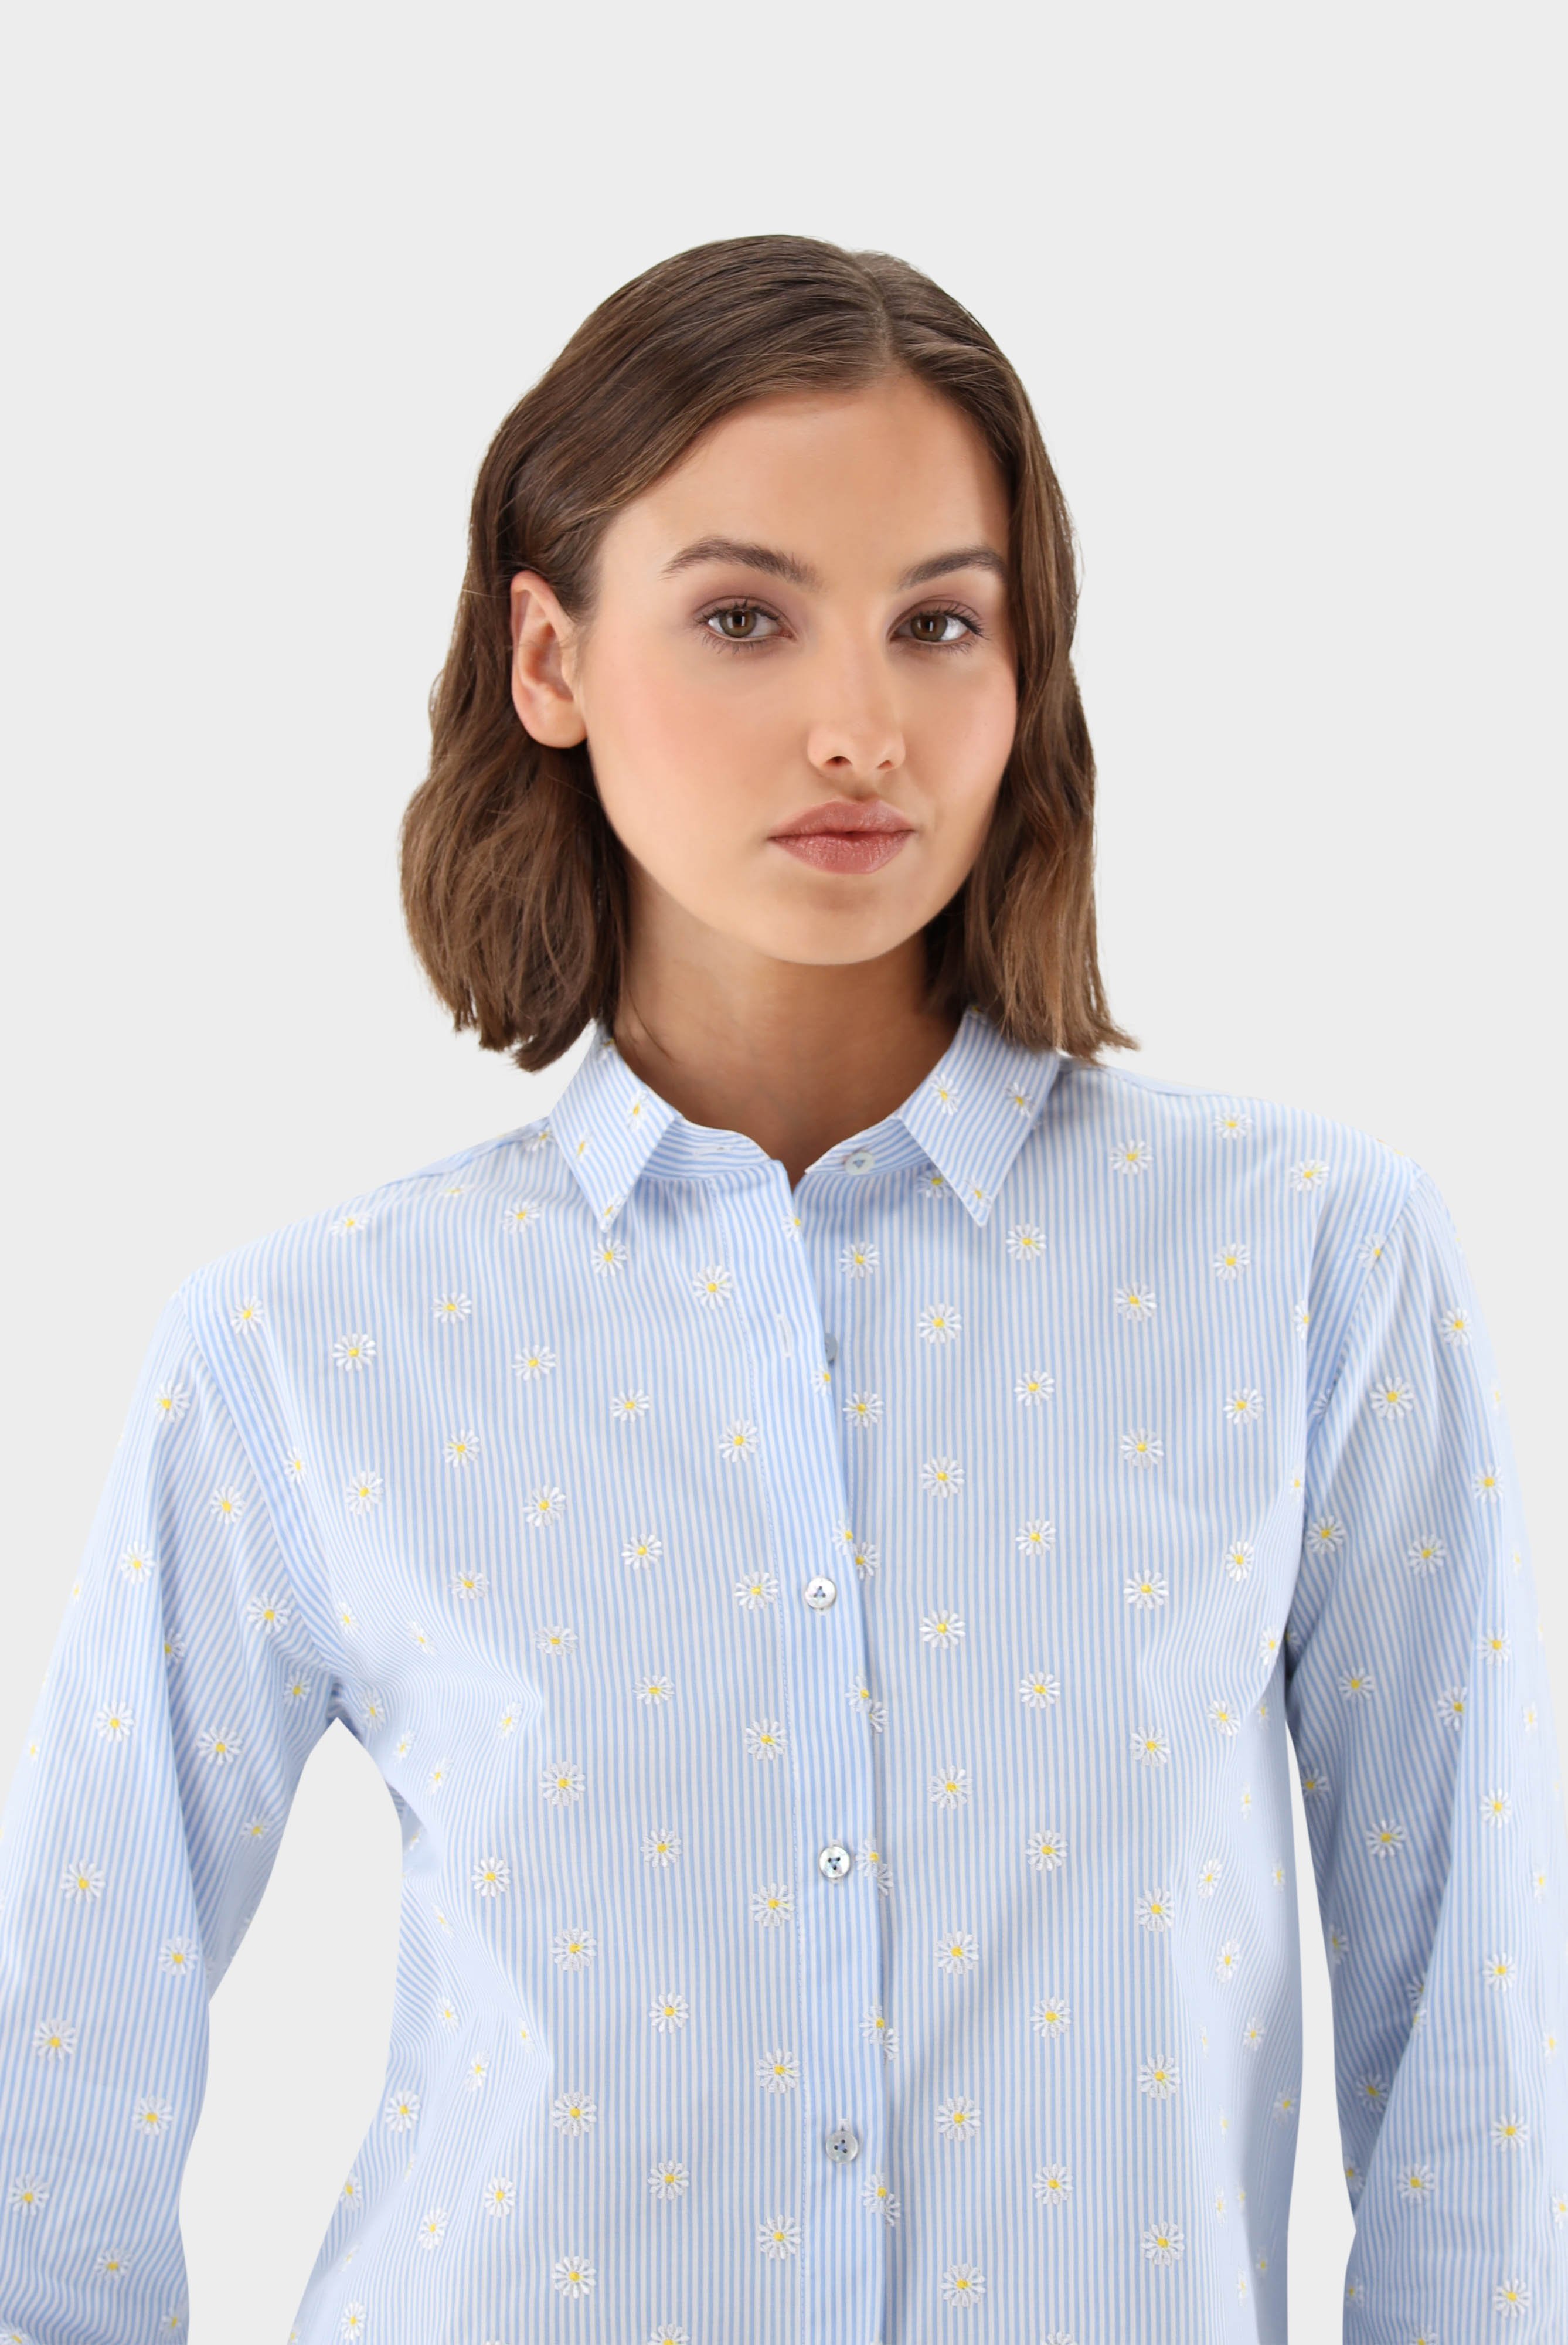 Casual Blouses+Striped shirt blouse with floral embroidery+05.528R.FU.151316.730.38